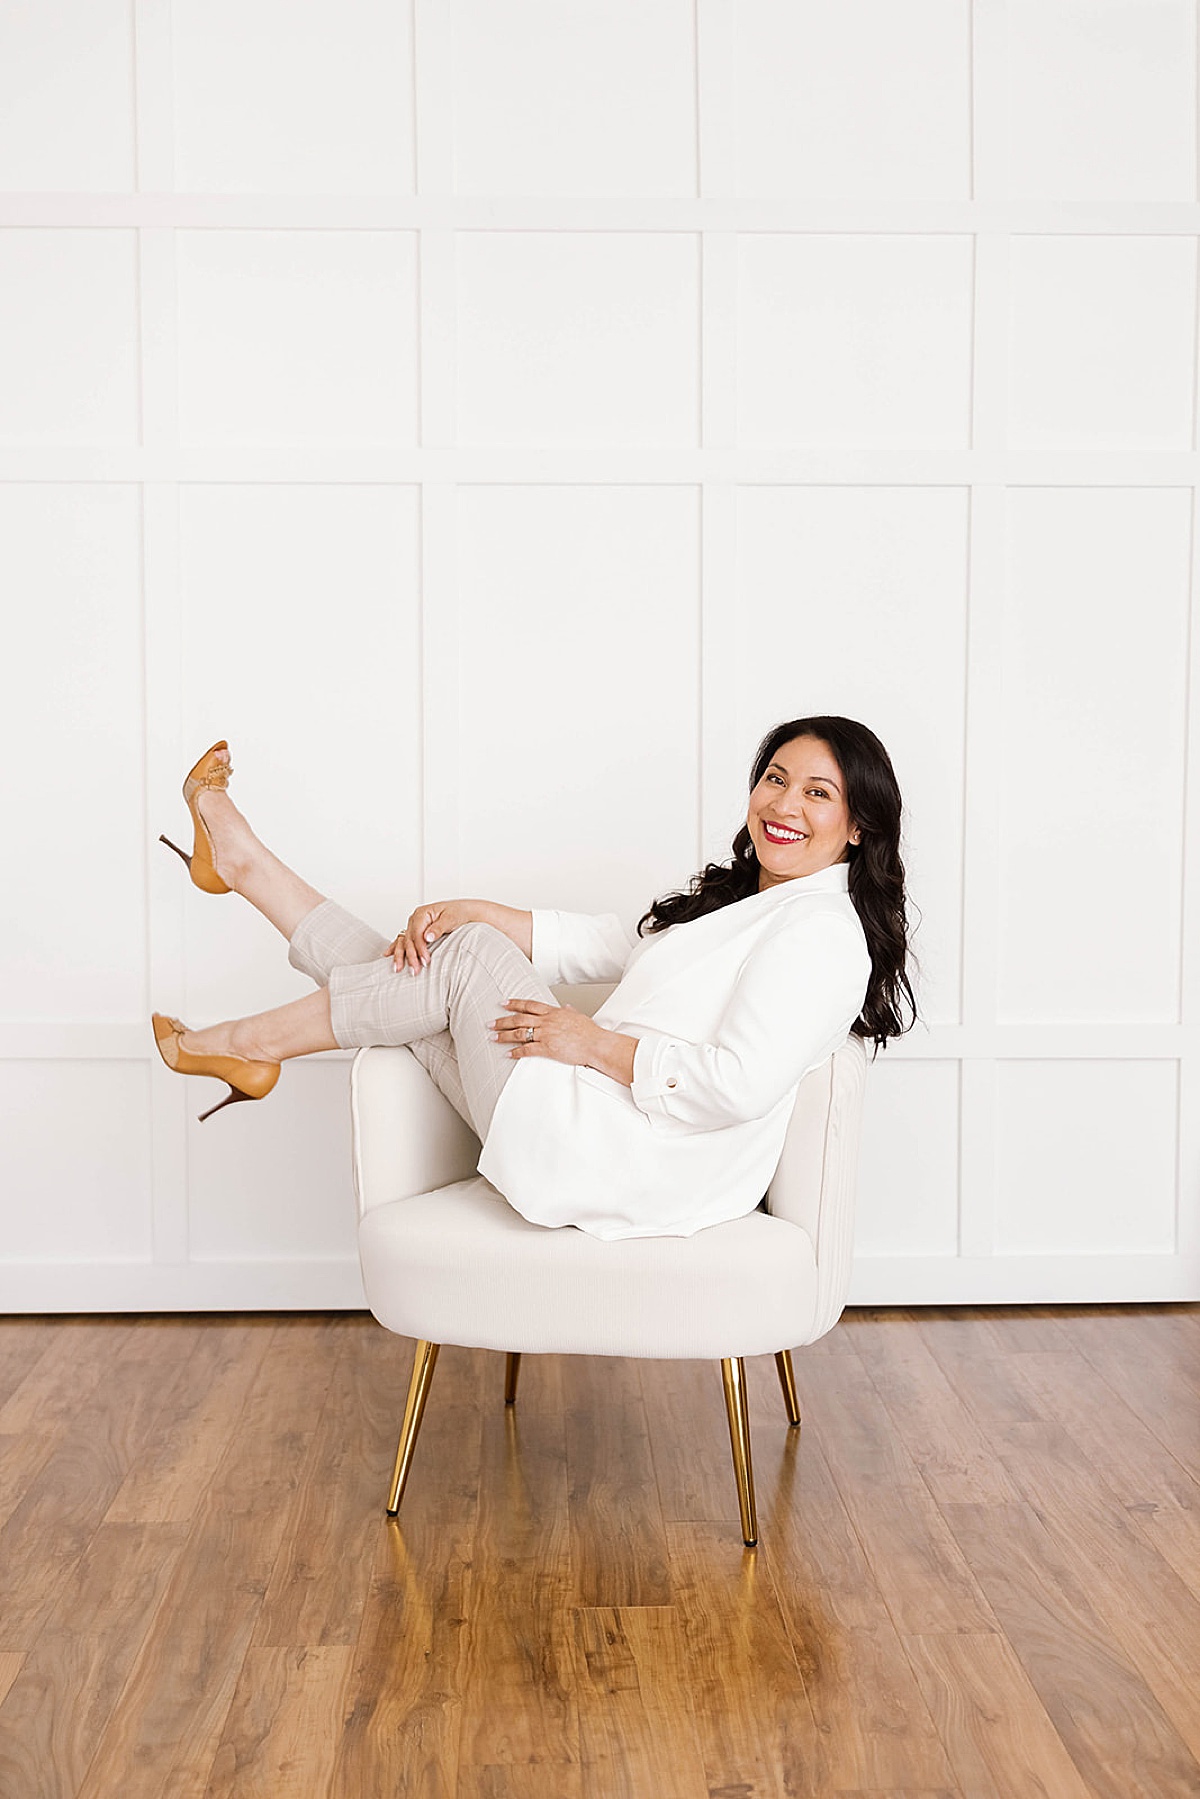 women with brown hair sitting in chair during her brand photoshoot